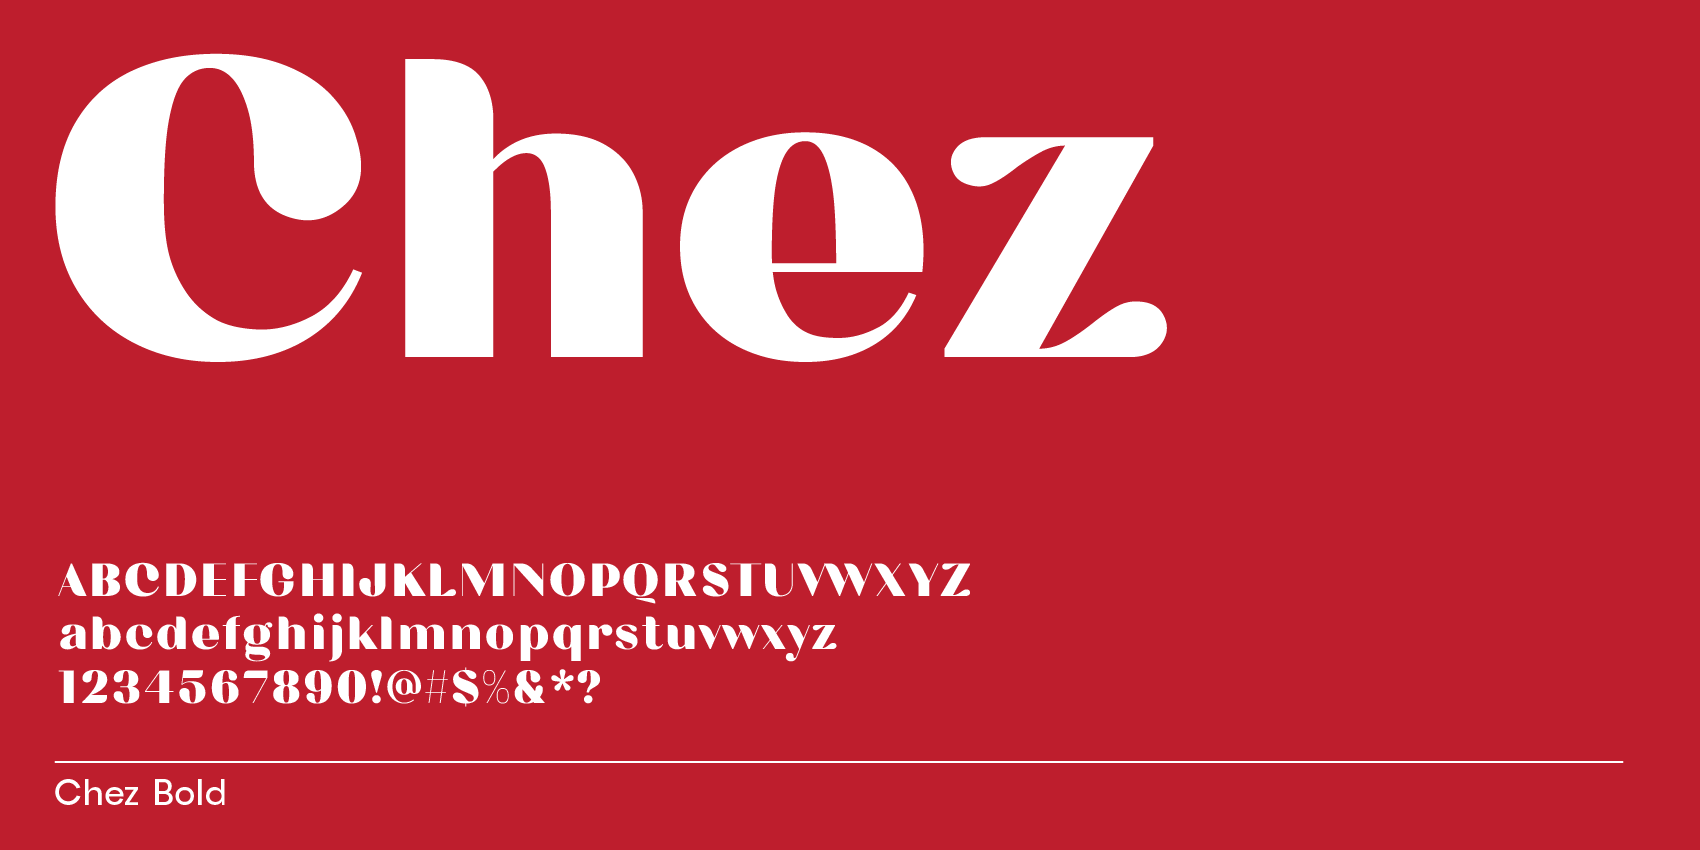 Chez, rounded contrast sans font for a soft feel in bolder weights